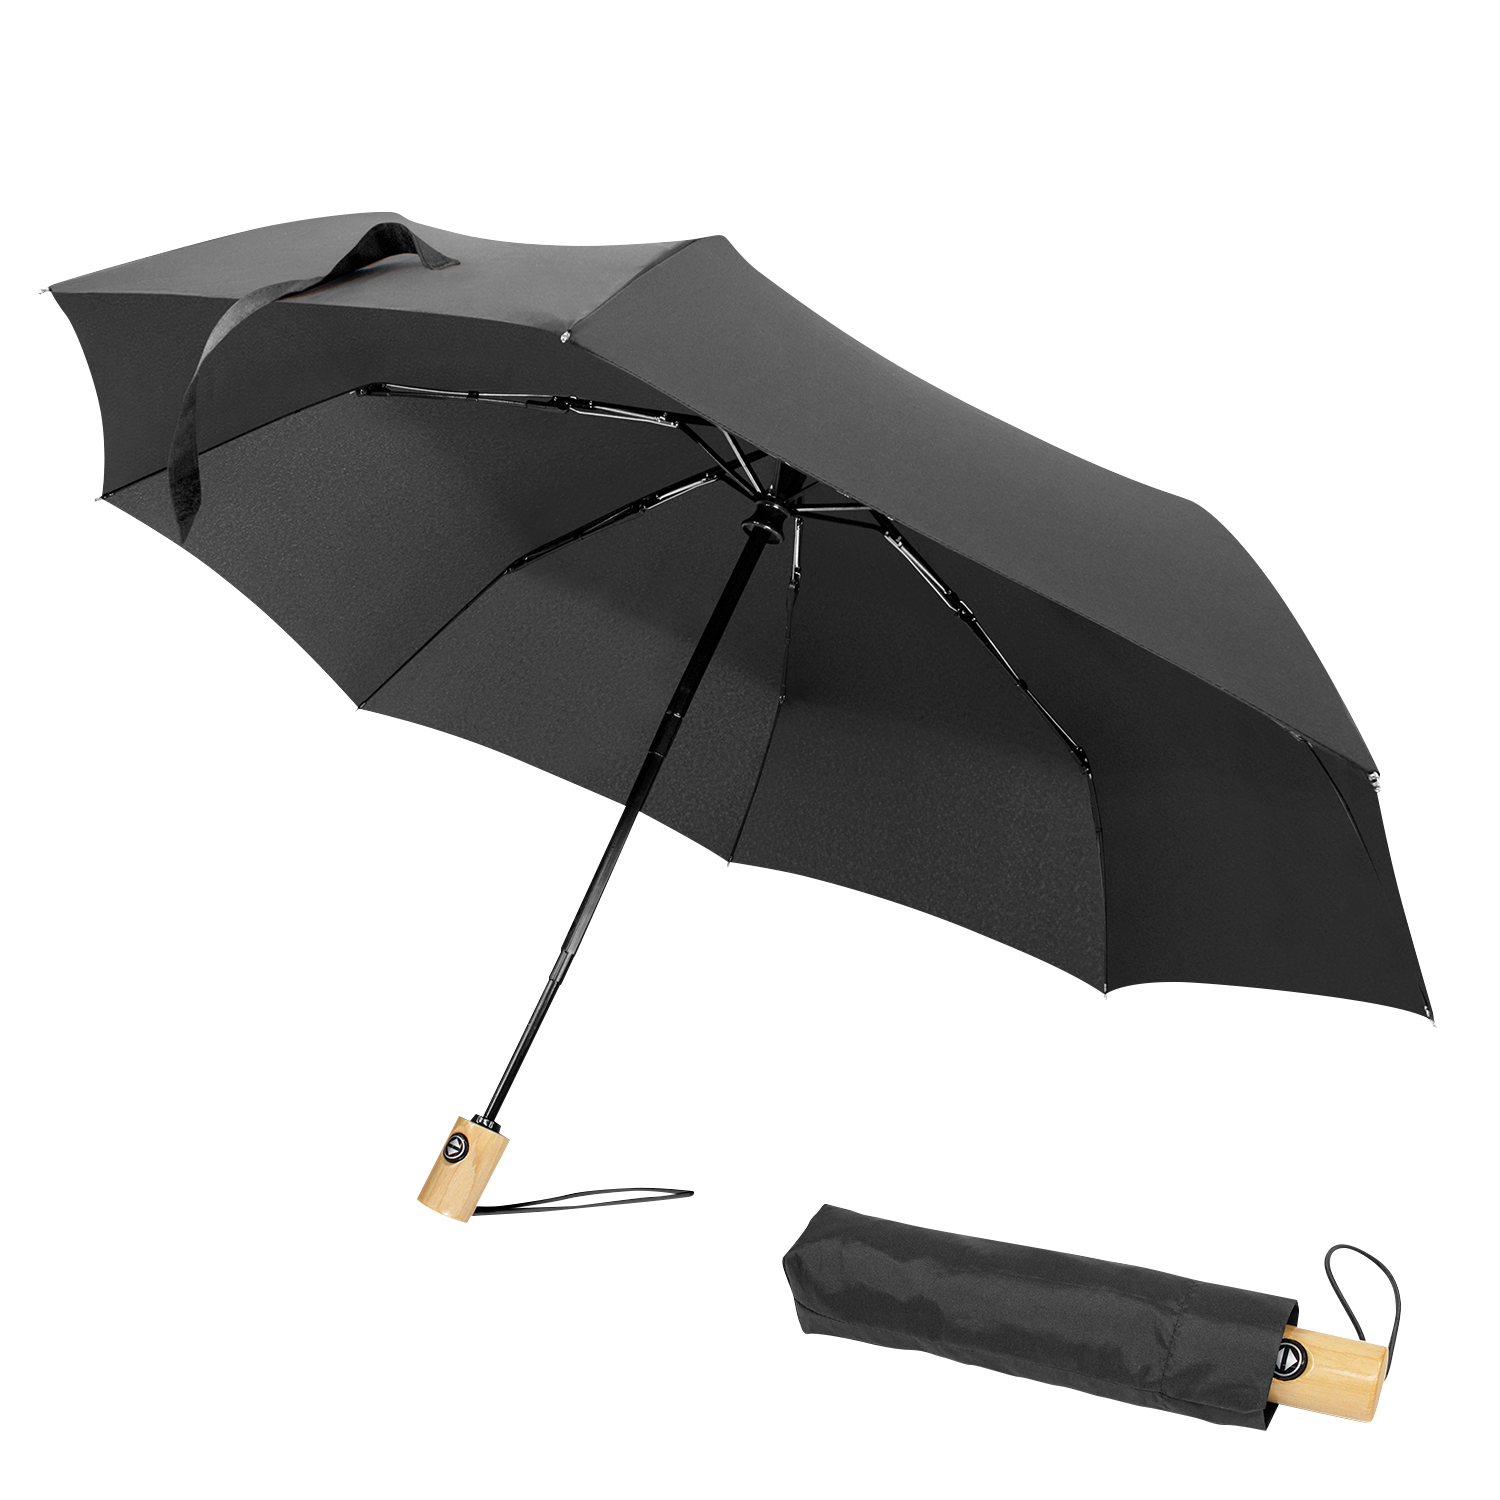 STORM PROOF ECO®️  (RPET) Personal Compact Travel Umbrella With Wind Proof Fibreglass Frame, Japanese Oak Handle & SMART Automatic Open/Close